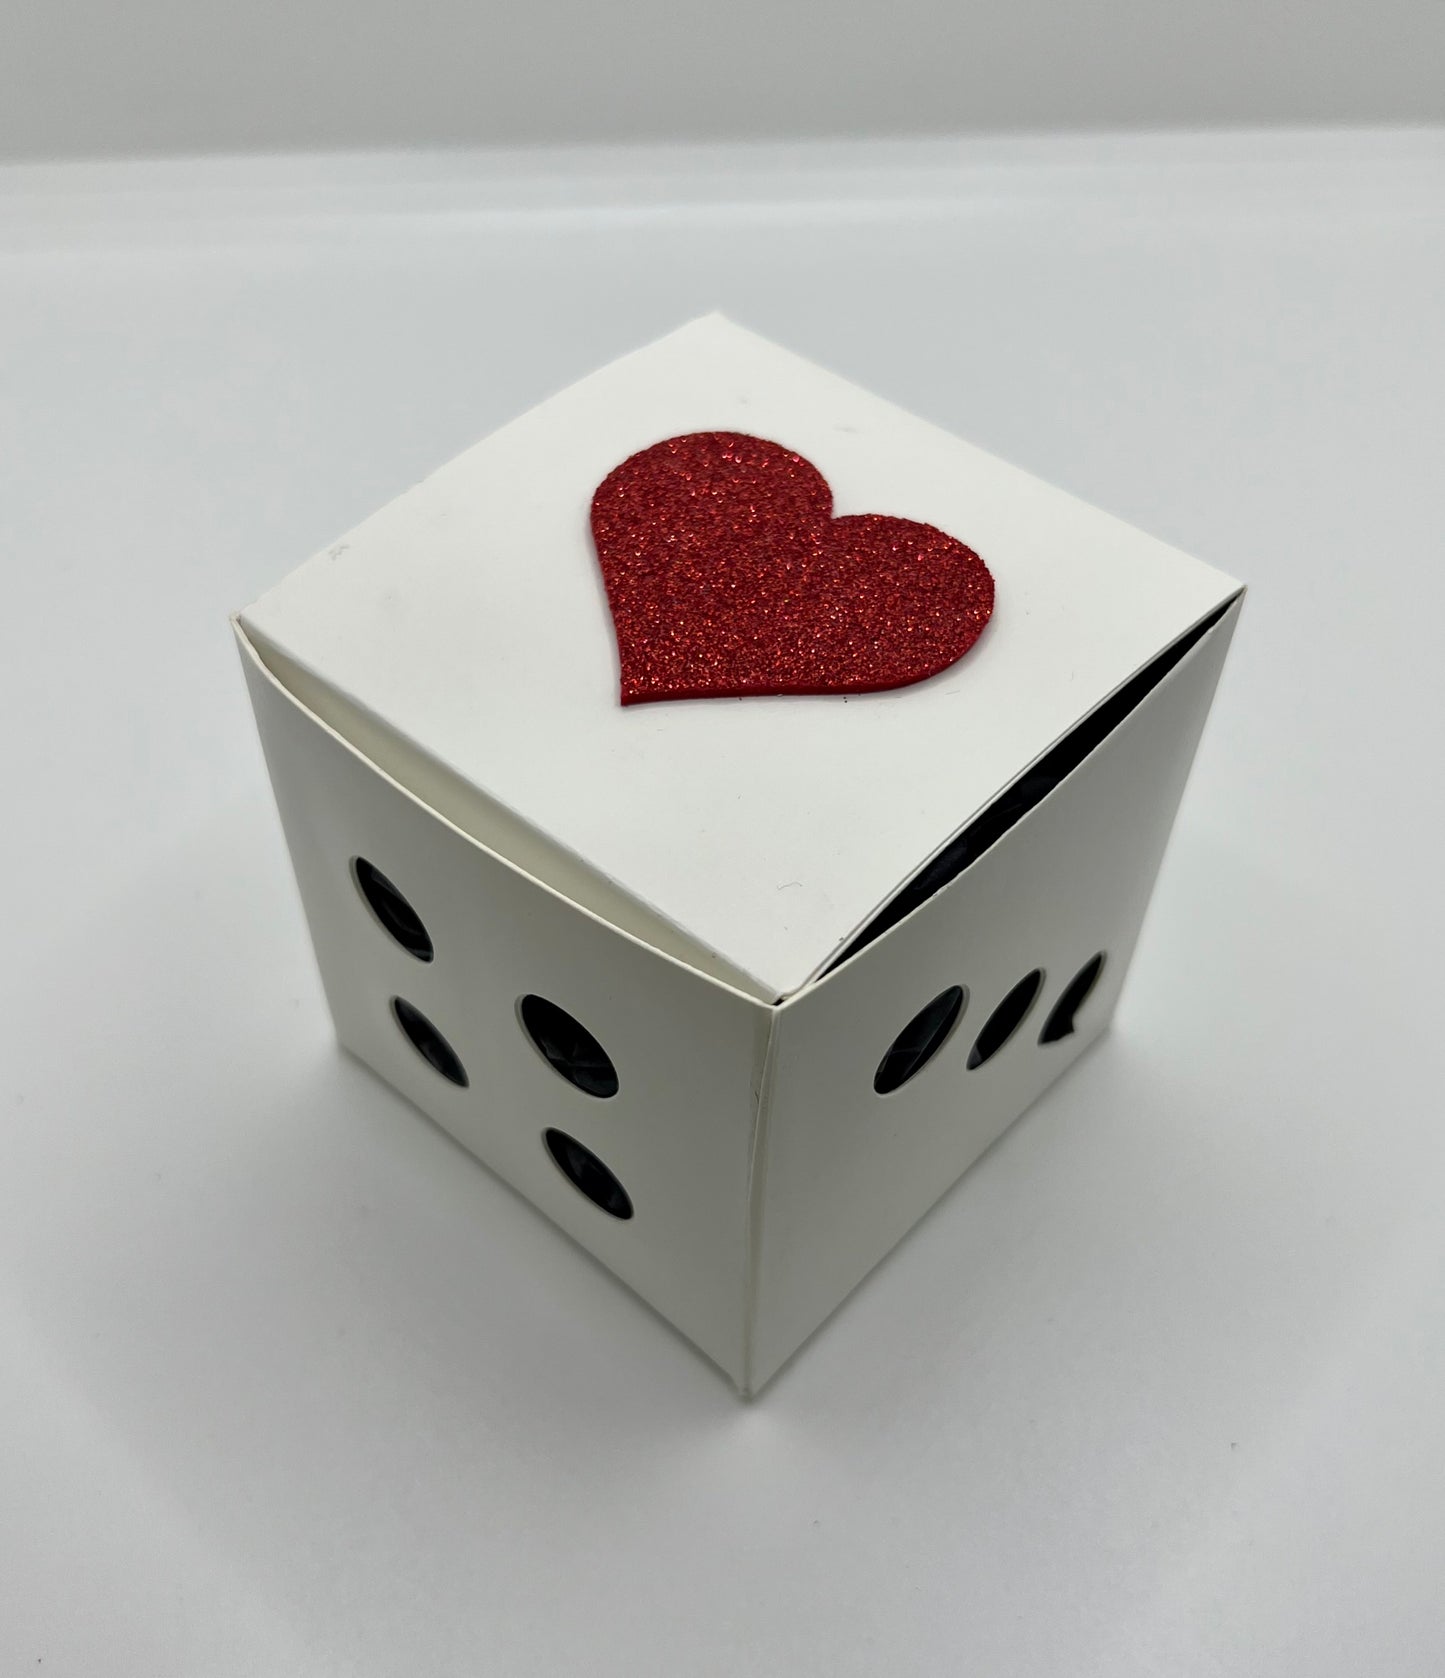 Valentines Day Dice Gift Box with Gold Plated Earrings Gift and I Love You You are My Chance Message